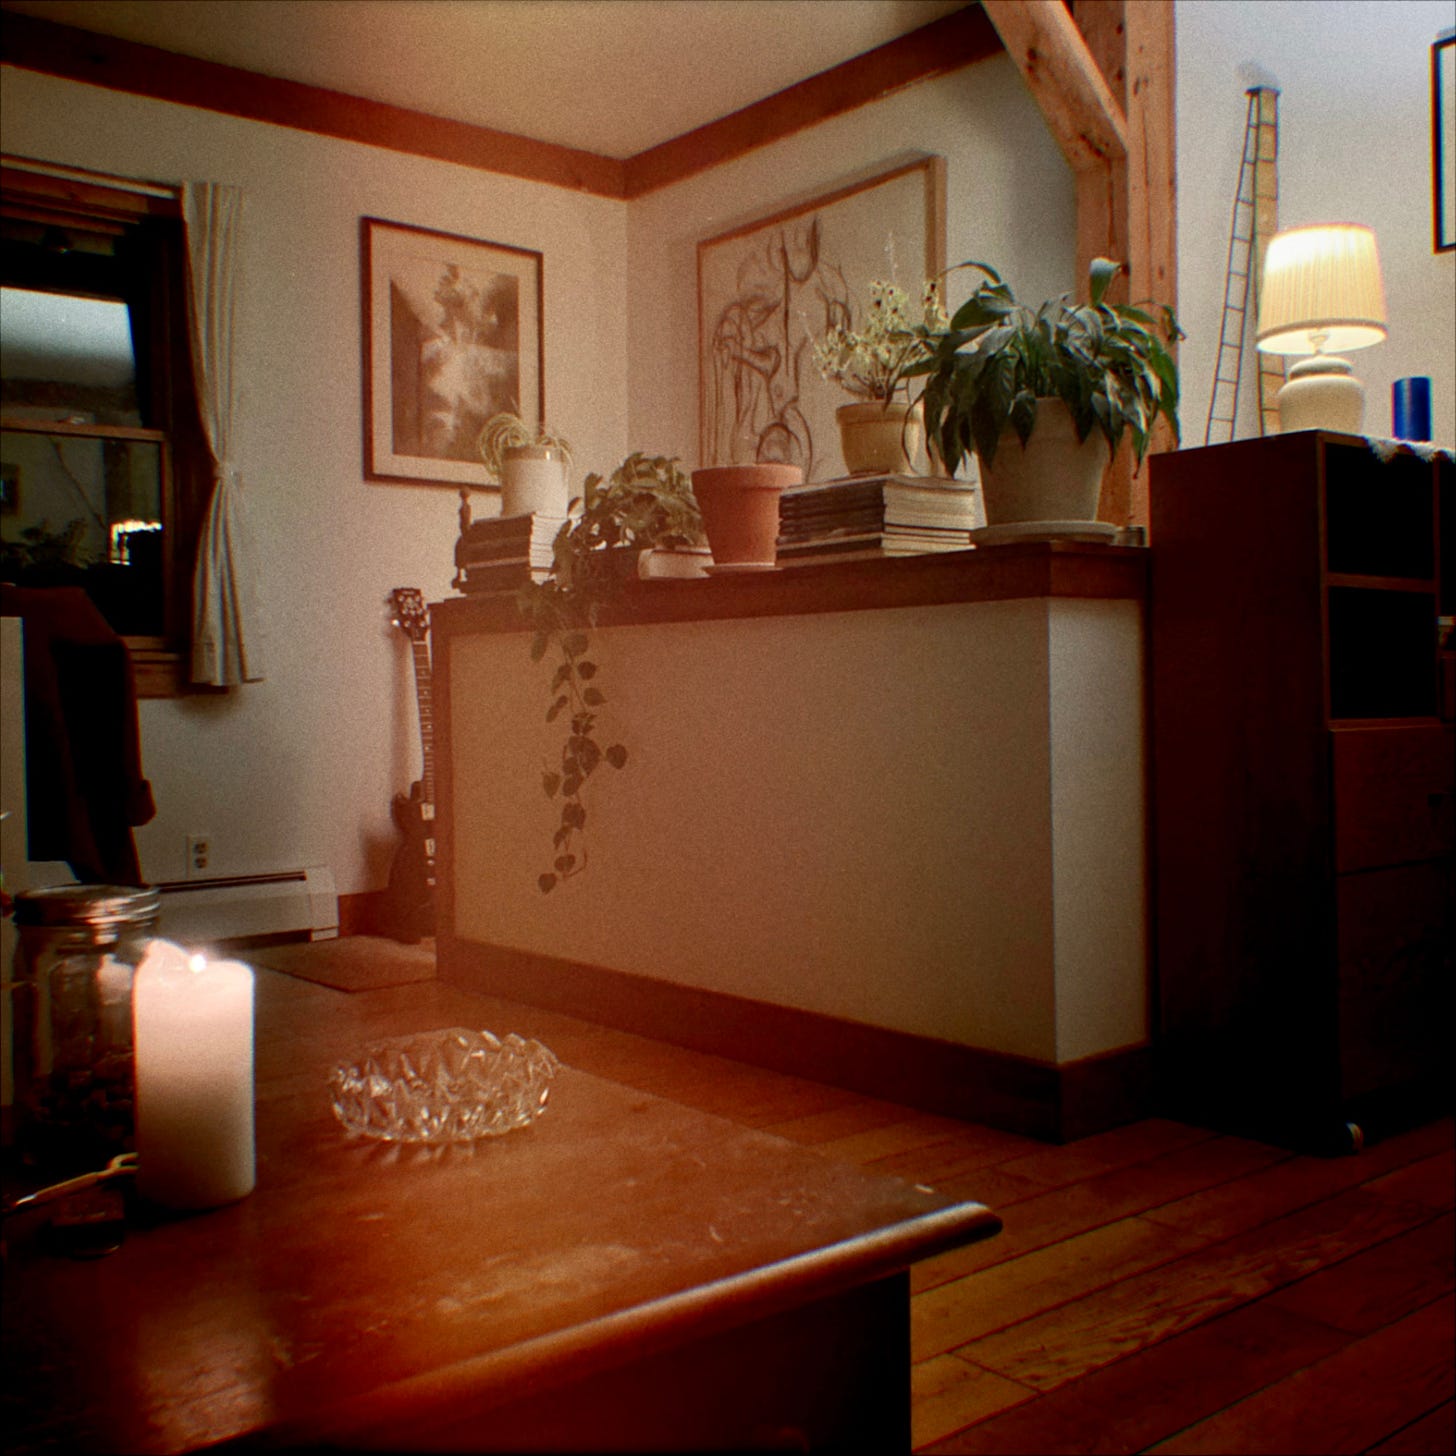 A snapshot of a lounge area with a sepia hue. In the lower right corner is a dark brown wooden table with a lit white candle and a cut glass bowl on it. Further to the right are windows with open curtains. In the centre, there is a high white ledge with several plants on it, behind there are two paintings on the white walls. To the top left is a lit small white lamp on another dark wooden piece of furniture.